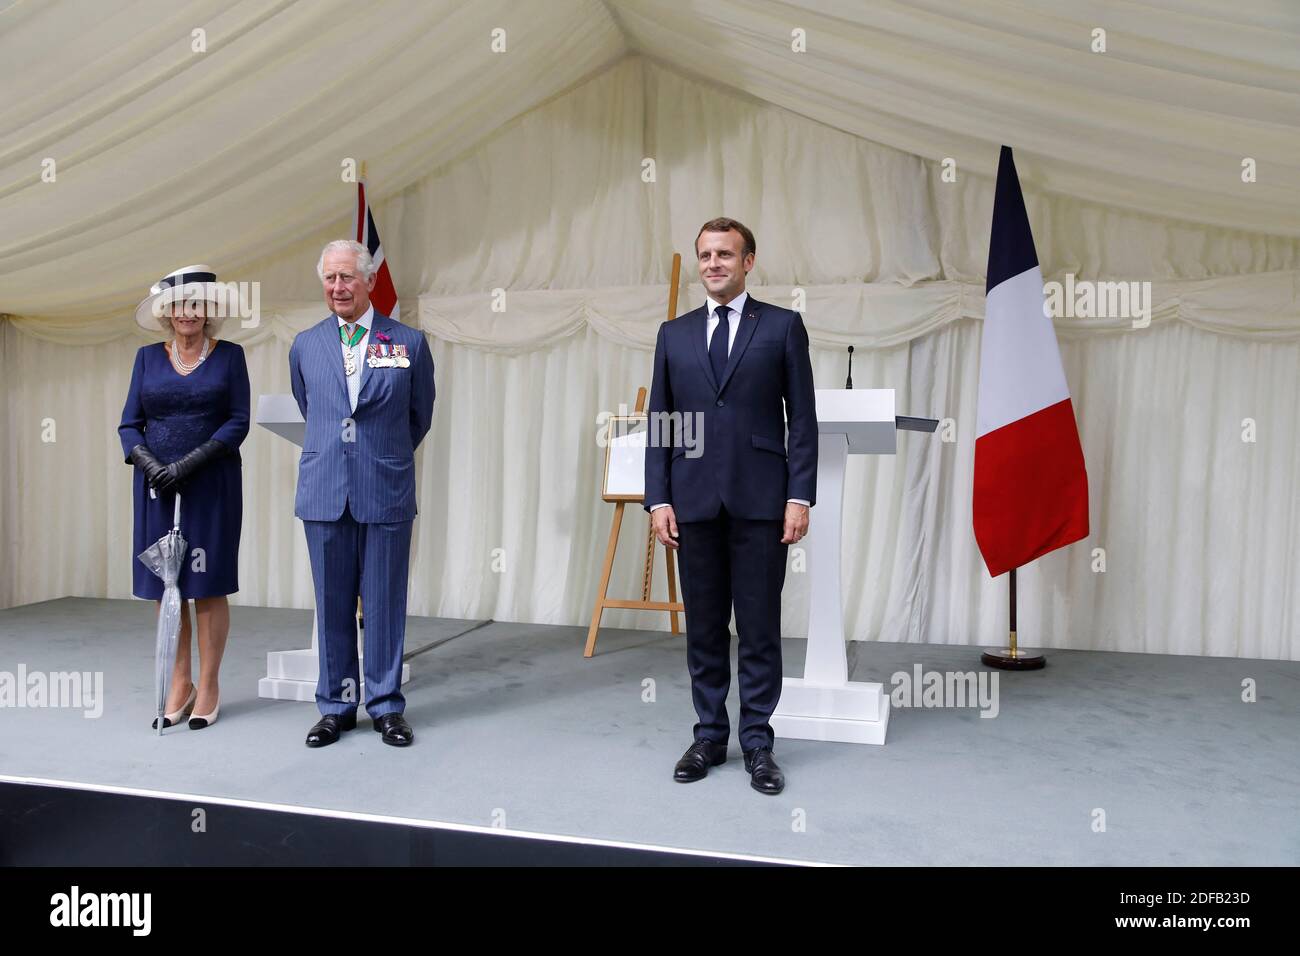 Britain's Camilla, Duchess of Cornwall (L), Britain's Prince Charles, Prince of Wales (C) and French President Emmanuel Macron (R) stand after a ceremony to present the Legion d'Honneur – France's highest distinction – to London for services during WW2 at Carlton Gardens in central London on June 18, 2020 during a visit to mark the anniversary of former de Gaulle's appeal to French people to resist the Nazi occupation. - Macron visited London on June 18 to commemorate the 80th anniversary of former French president Charles de Gaulle's appeal to French people to resist the Nazi occupation durin Stock Photo